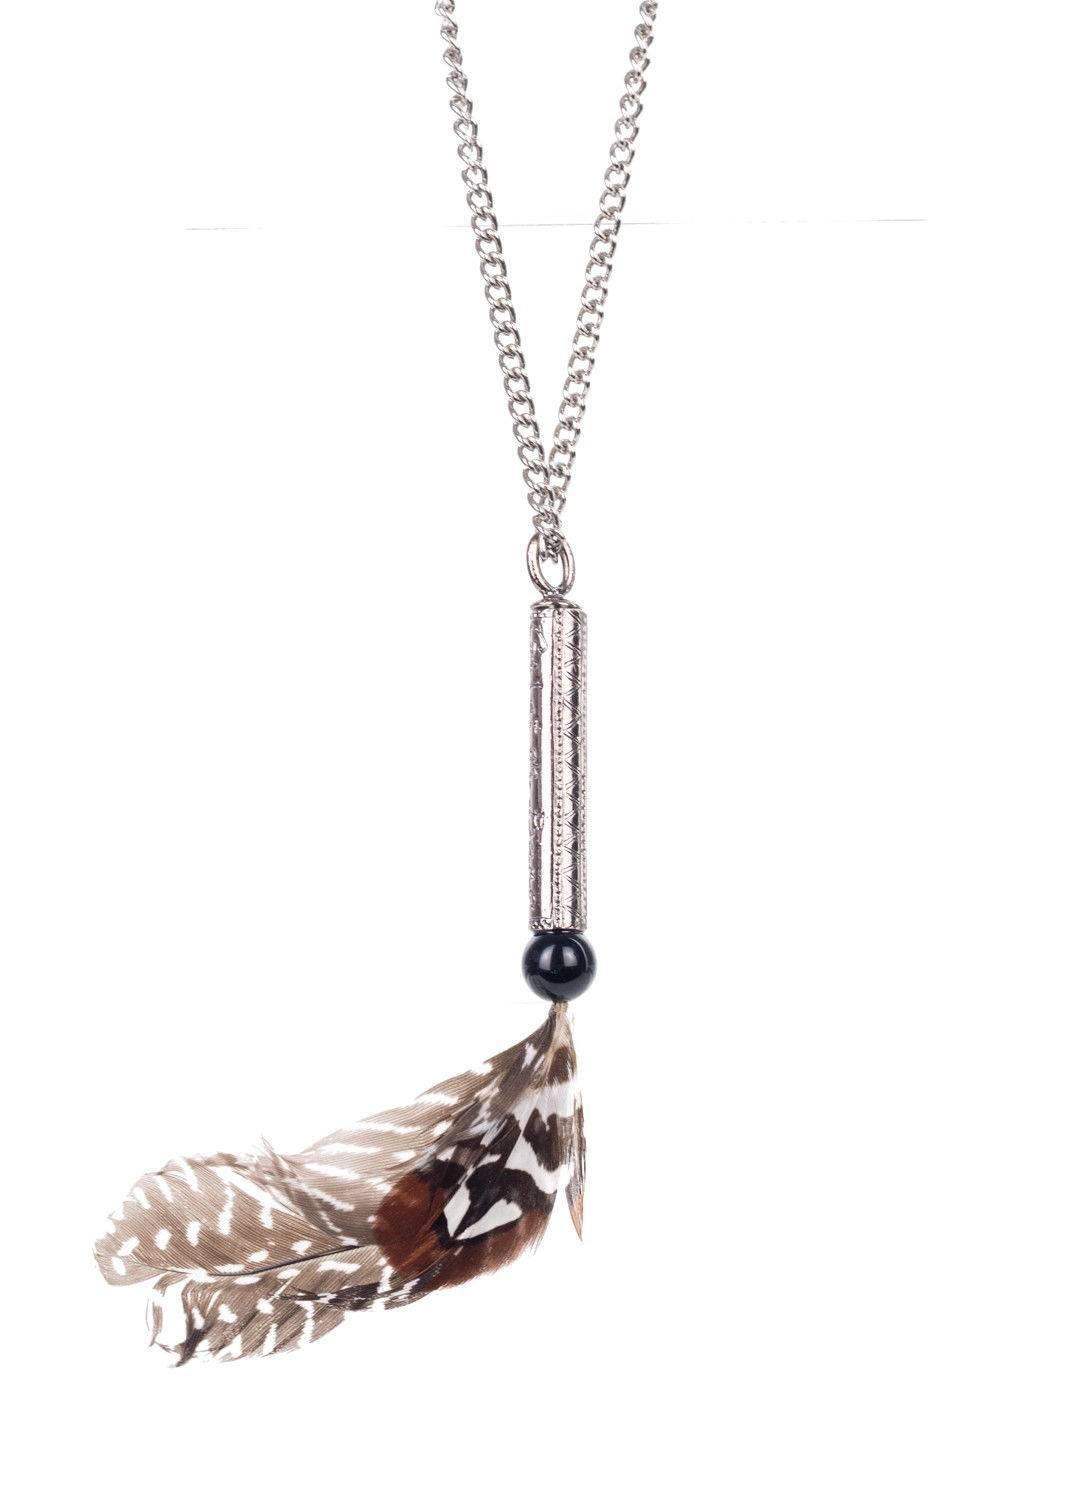 Roberto Cavalli silver plated long necklace. This necklace features a long silver chain adjustable with a lobster clasp designed with a feather and black enamel circle design. The necklace is a great edition to a maxi floral dress for a boho chic